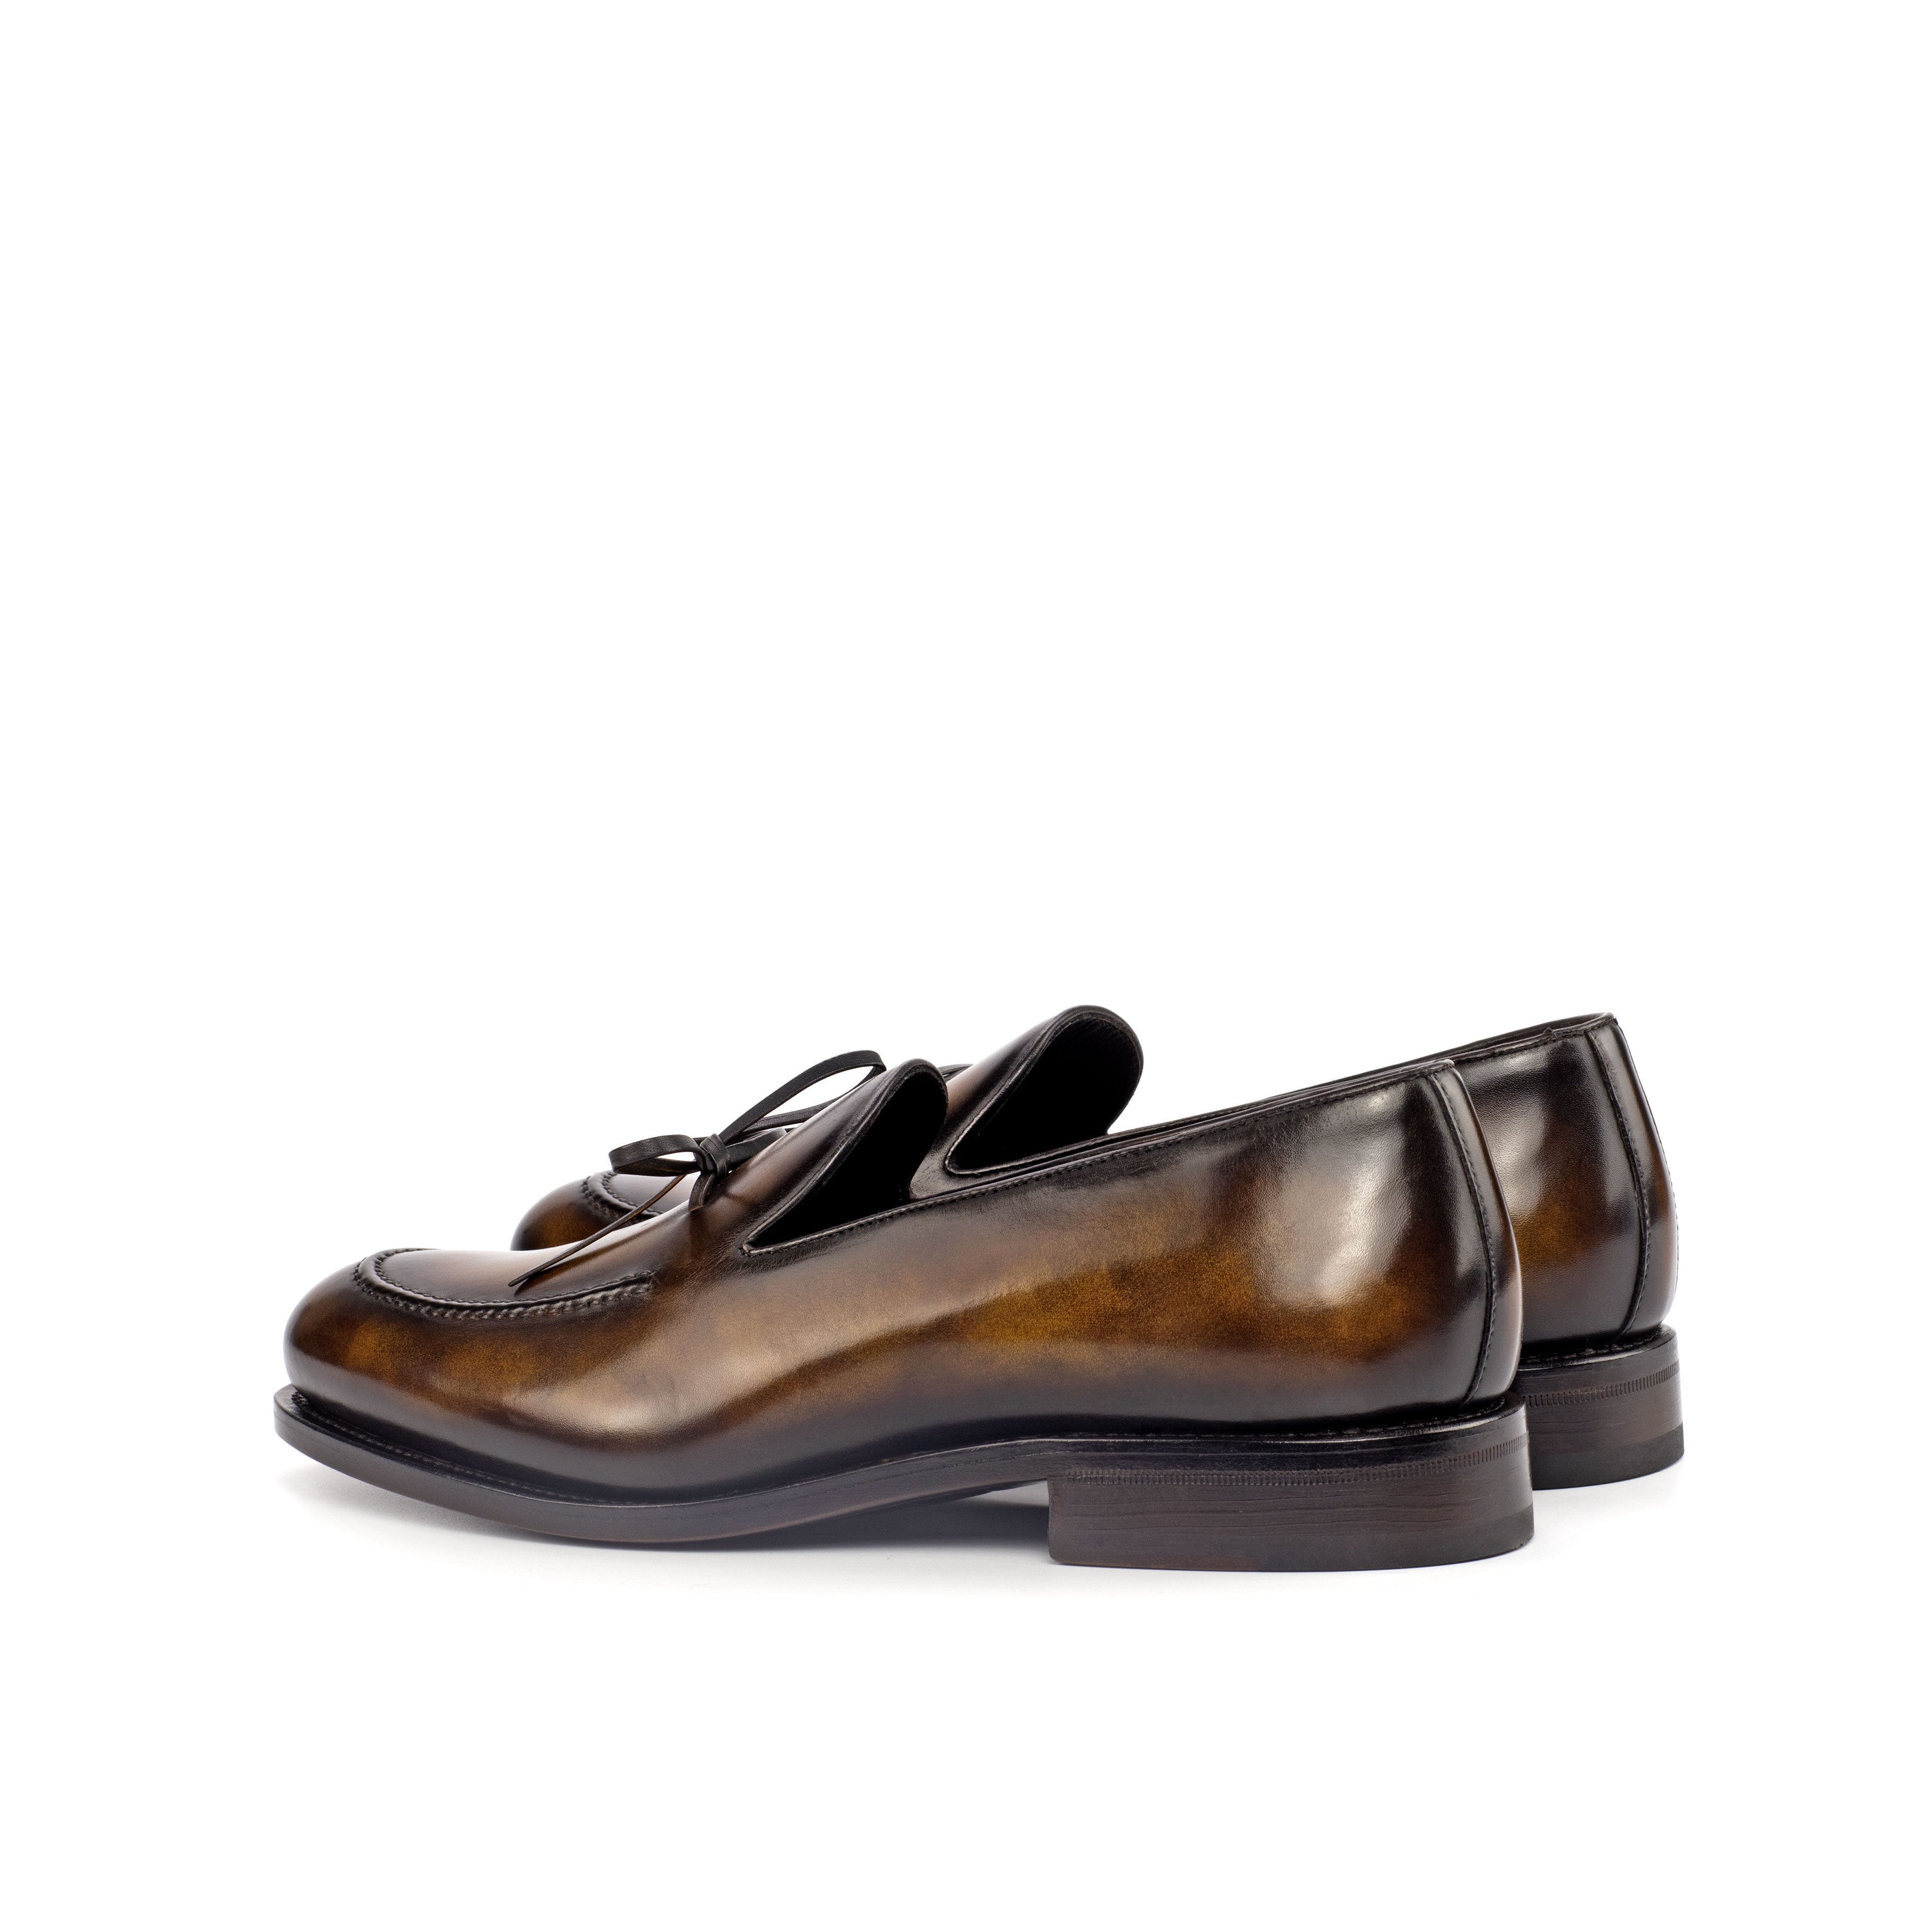 Tobacco Patina Loafer